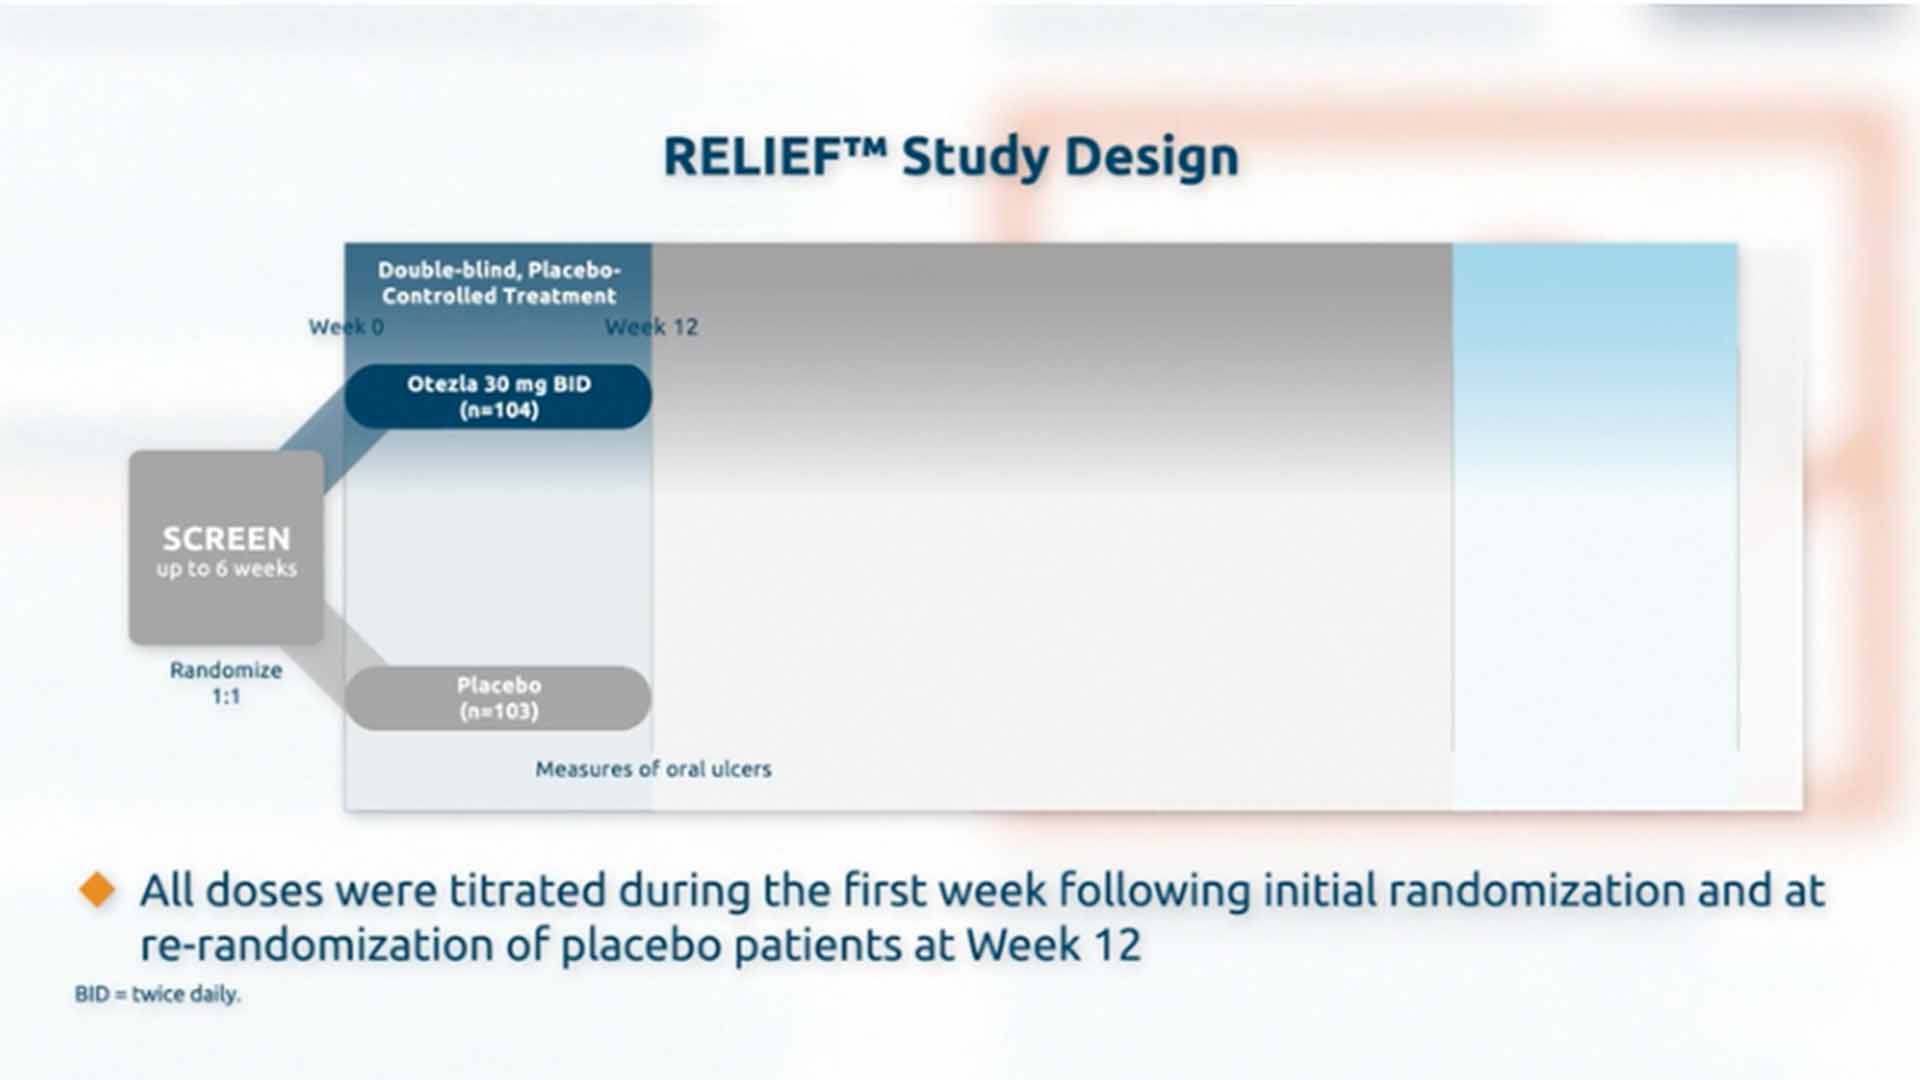 Otezla Is the First and Only FDA-Approved Therapy for Adult Patients with Oral Ulcers Associated With Behçet’s Disease